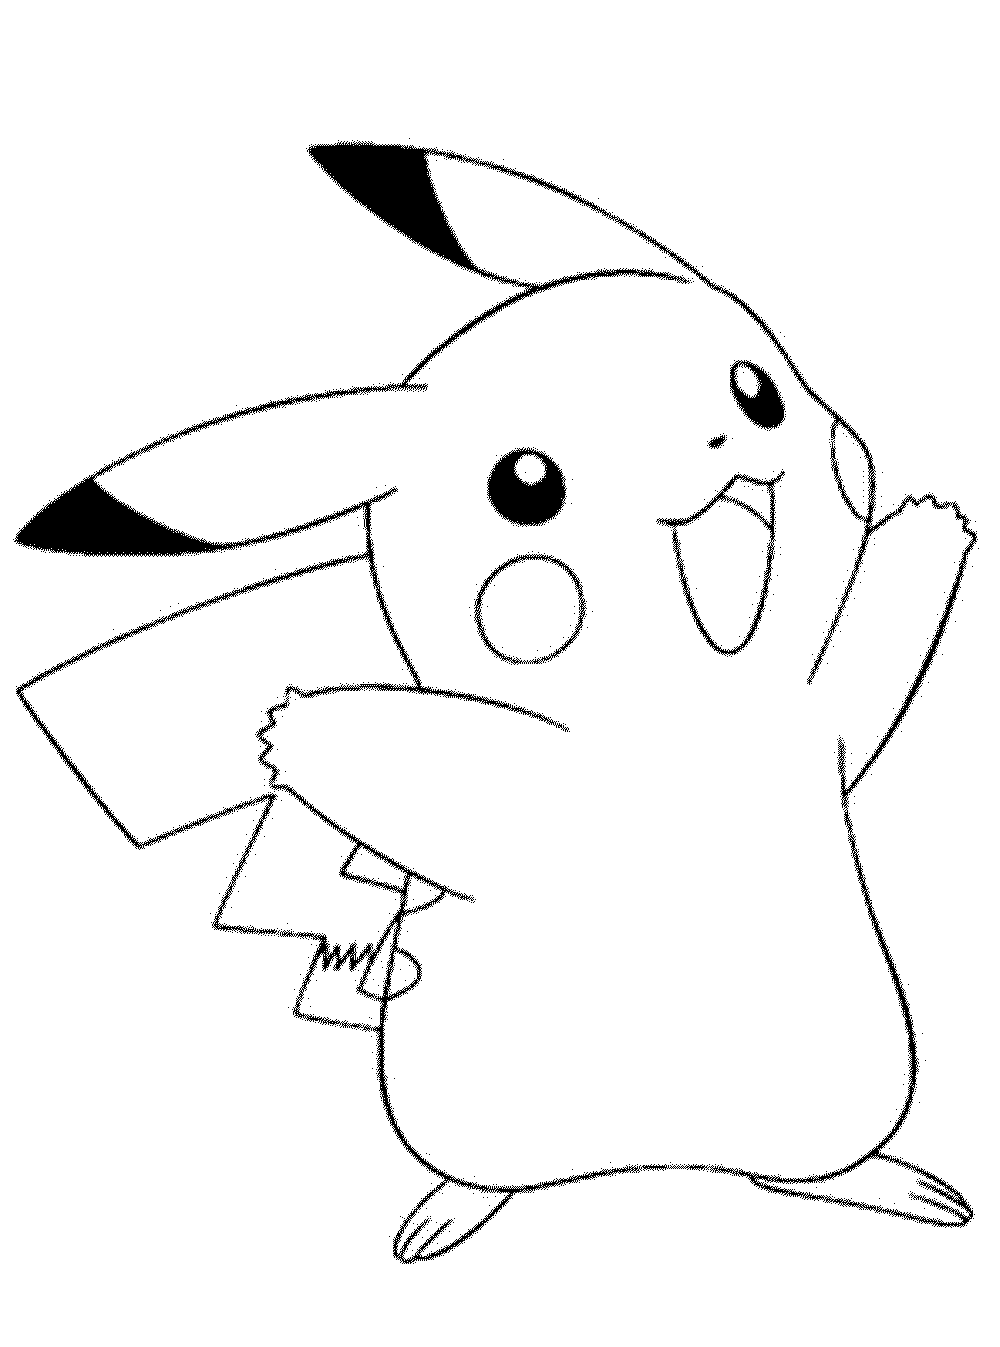 pokemon coloring pages - Clip Art Library